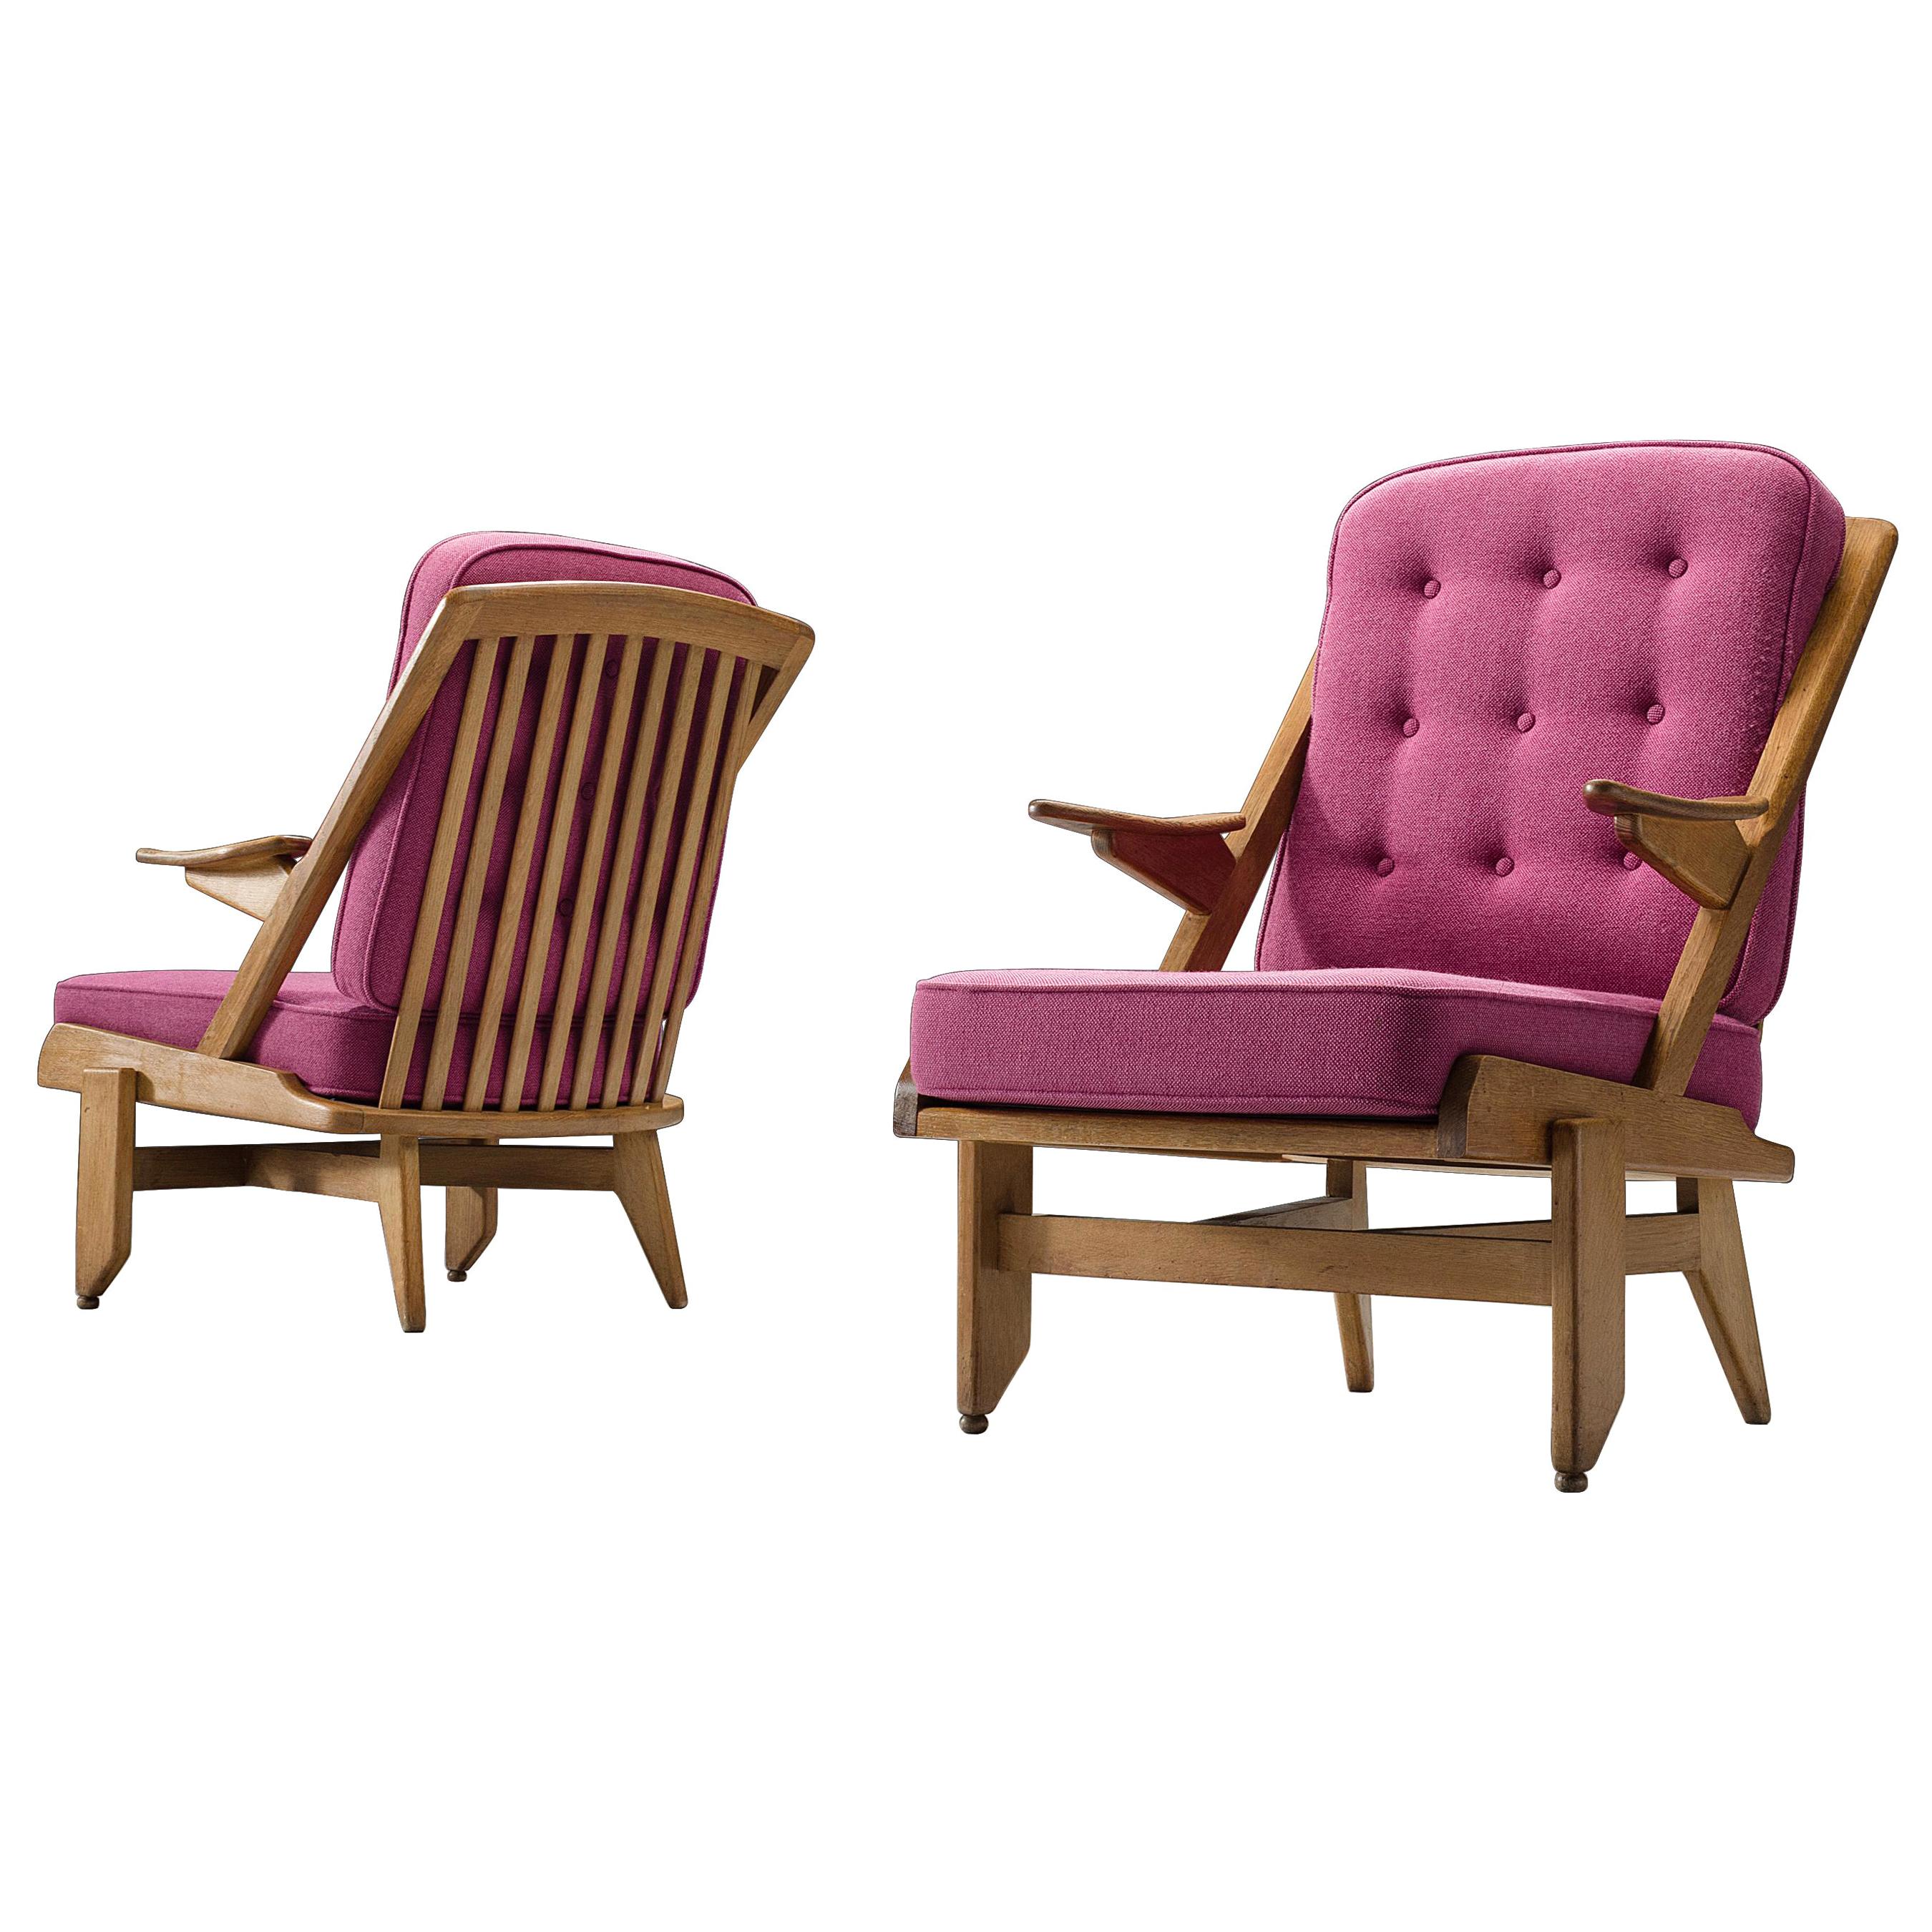 Guillerme and Chambron Pair of Lounge Chairs in Pink Upholstery